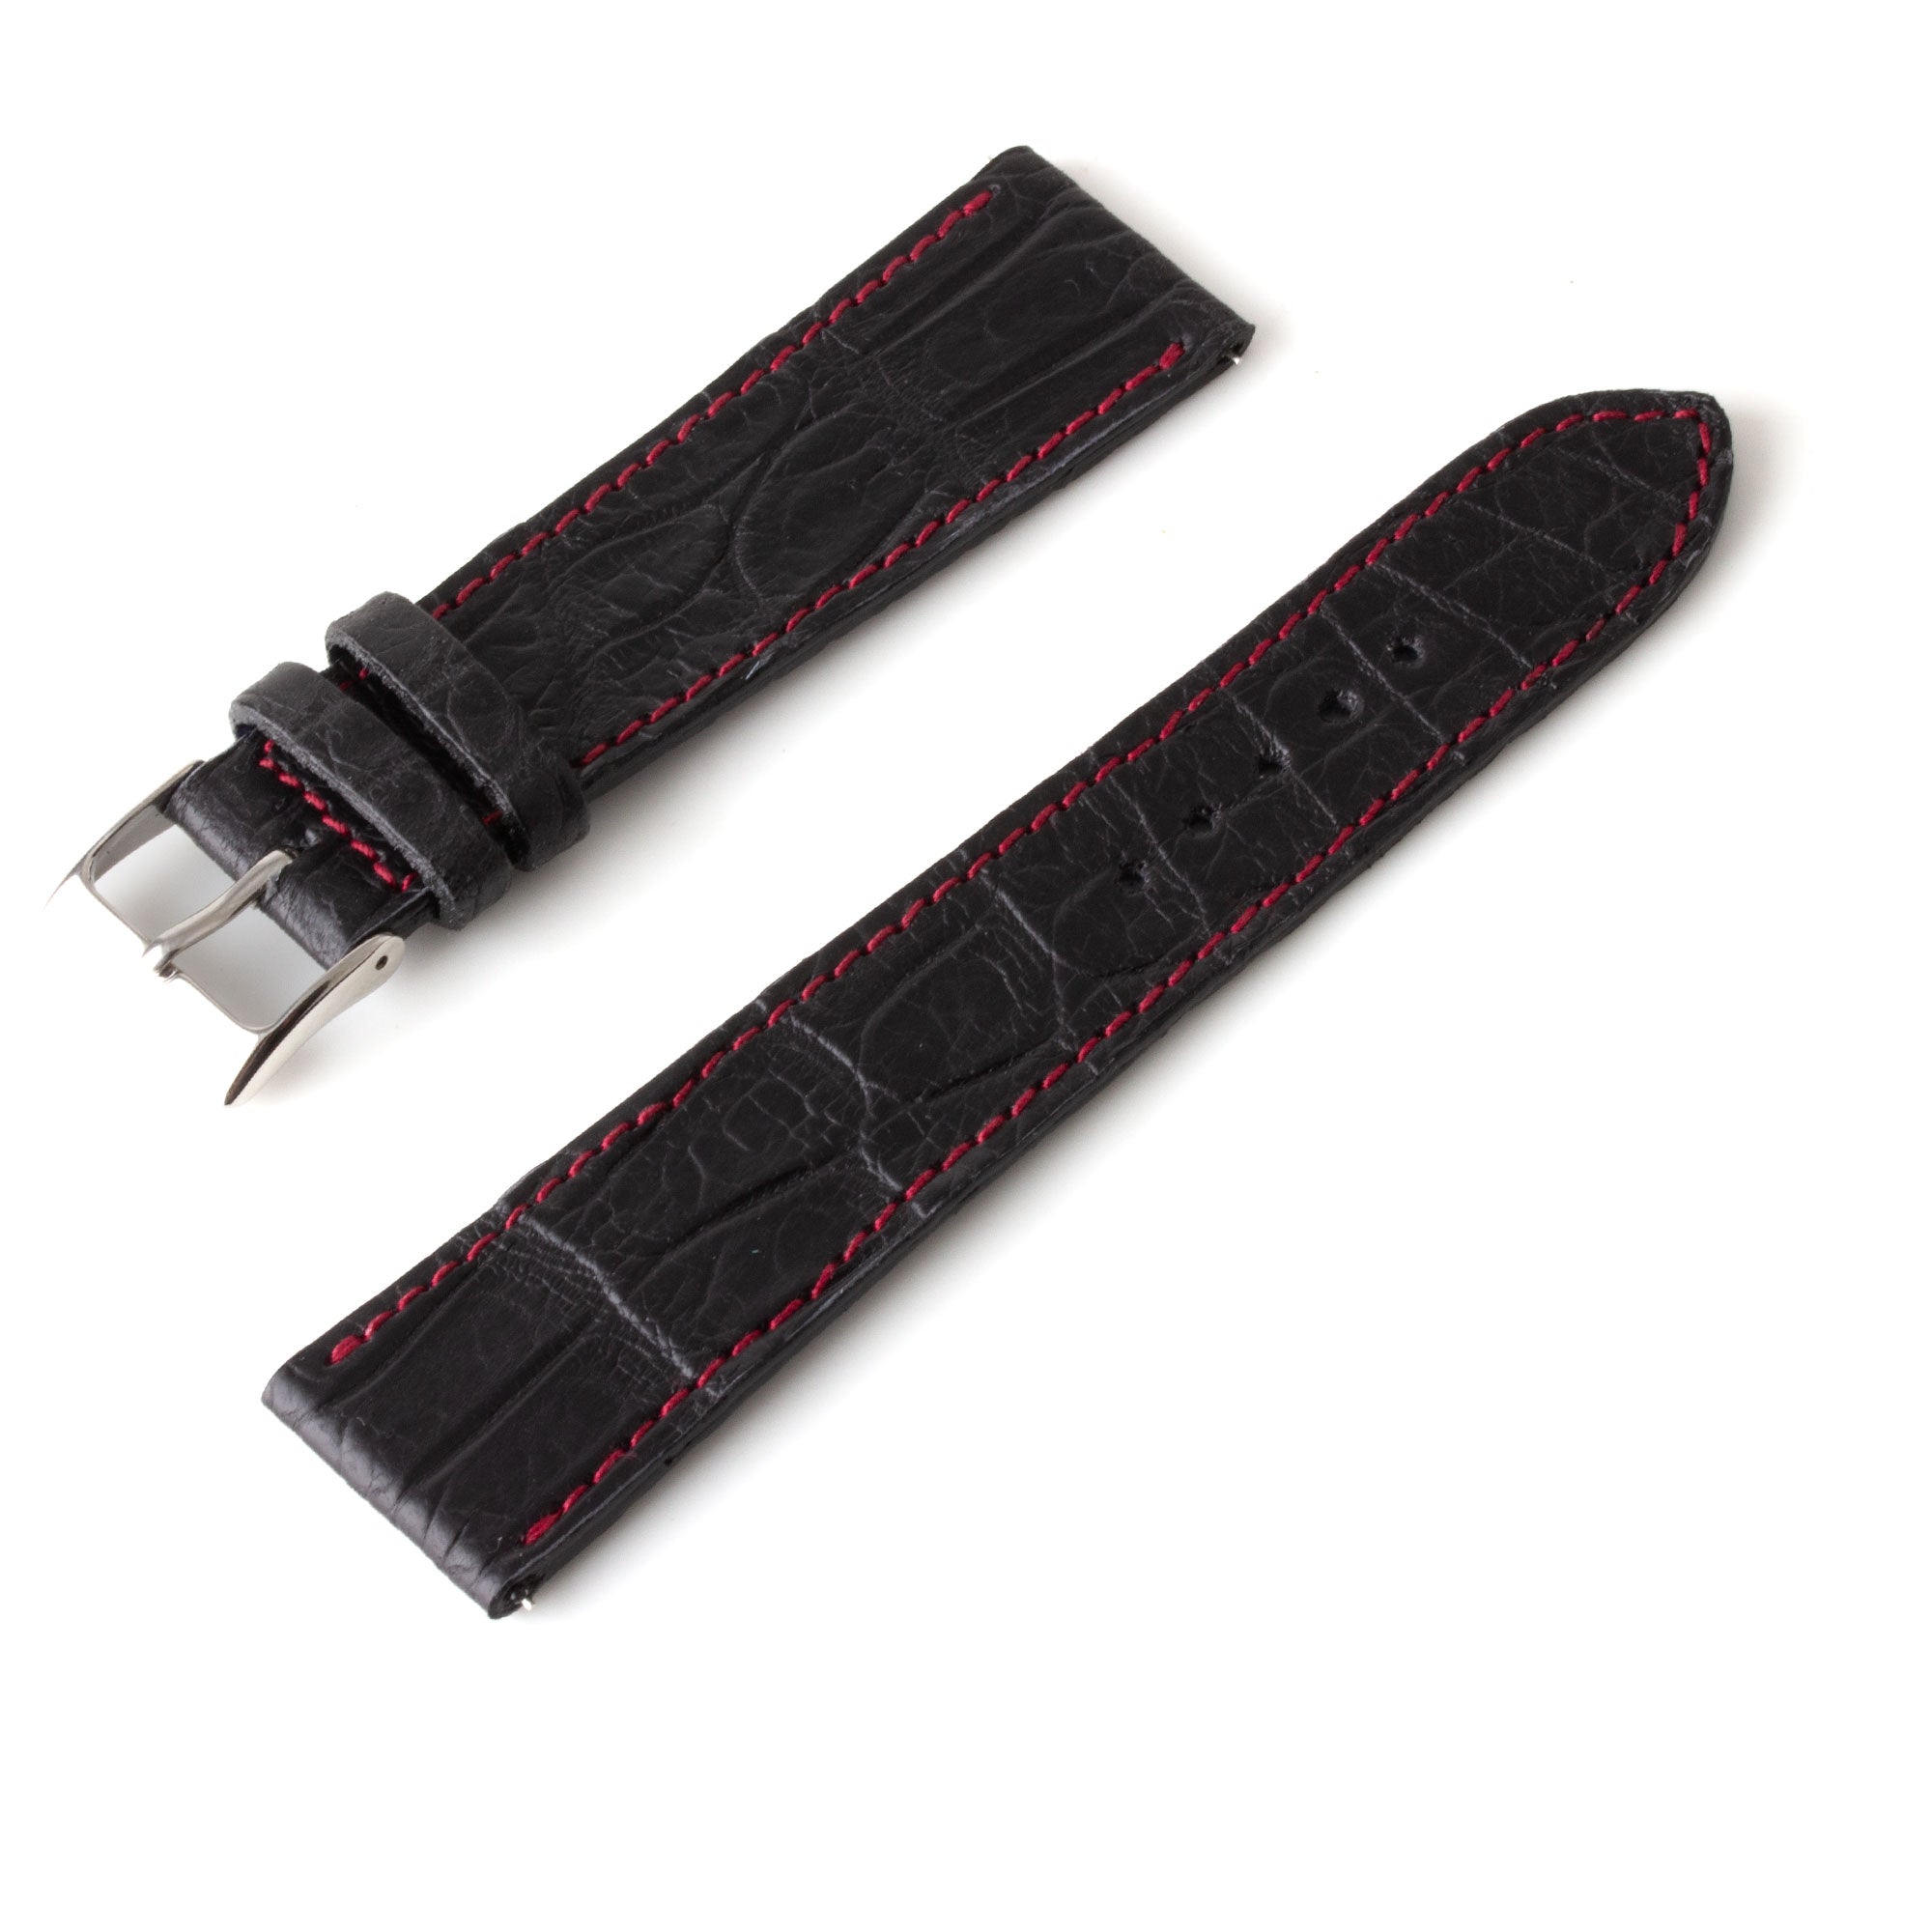 Alligator "Solo" leather watch band - 22mm width (0.87 inches) / Size M (n° 10)